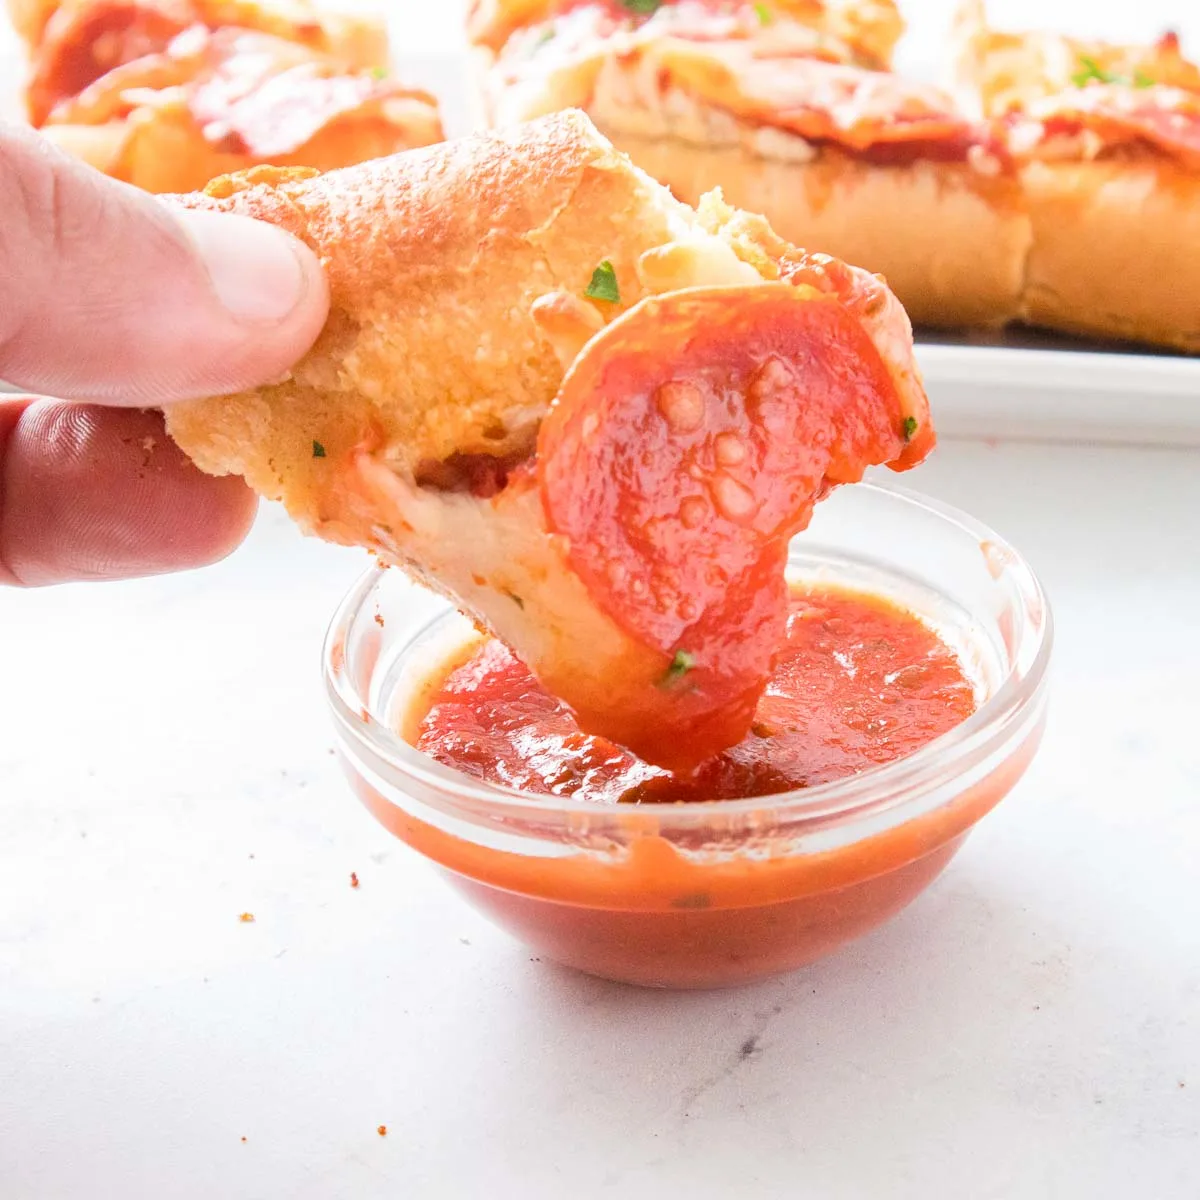 Hand dipping slice of garlic bread pizza into pizza sauce